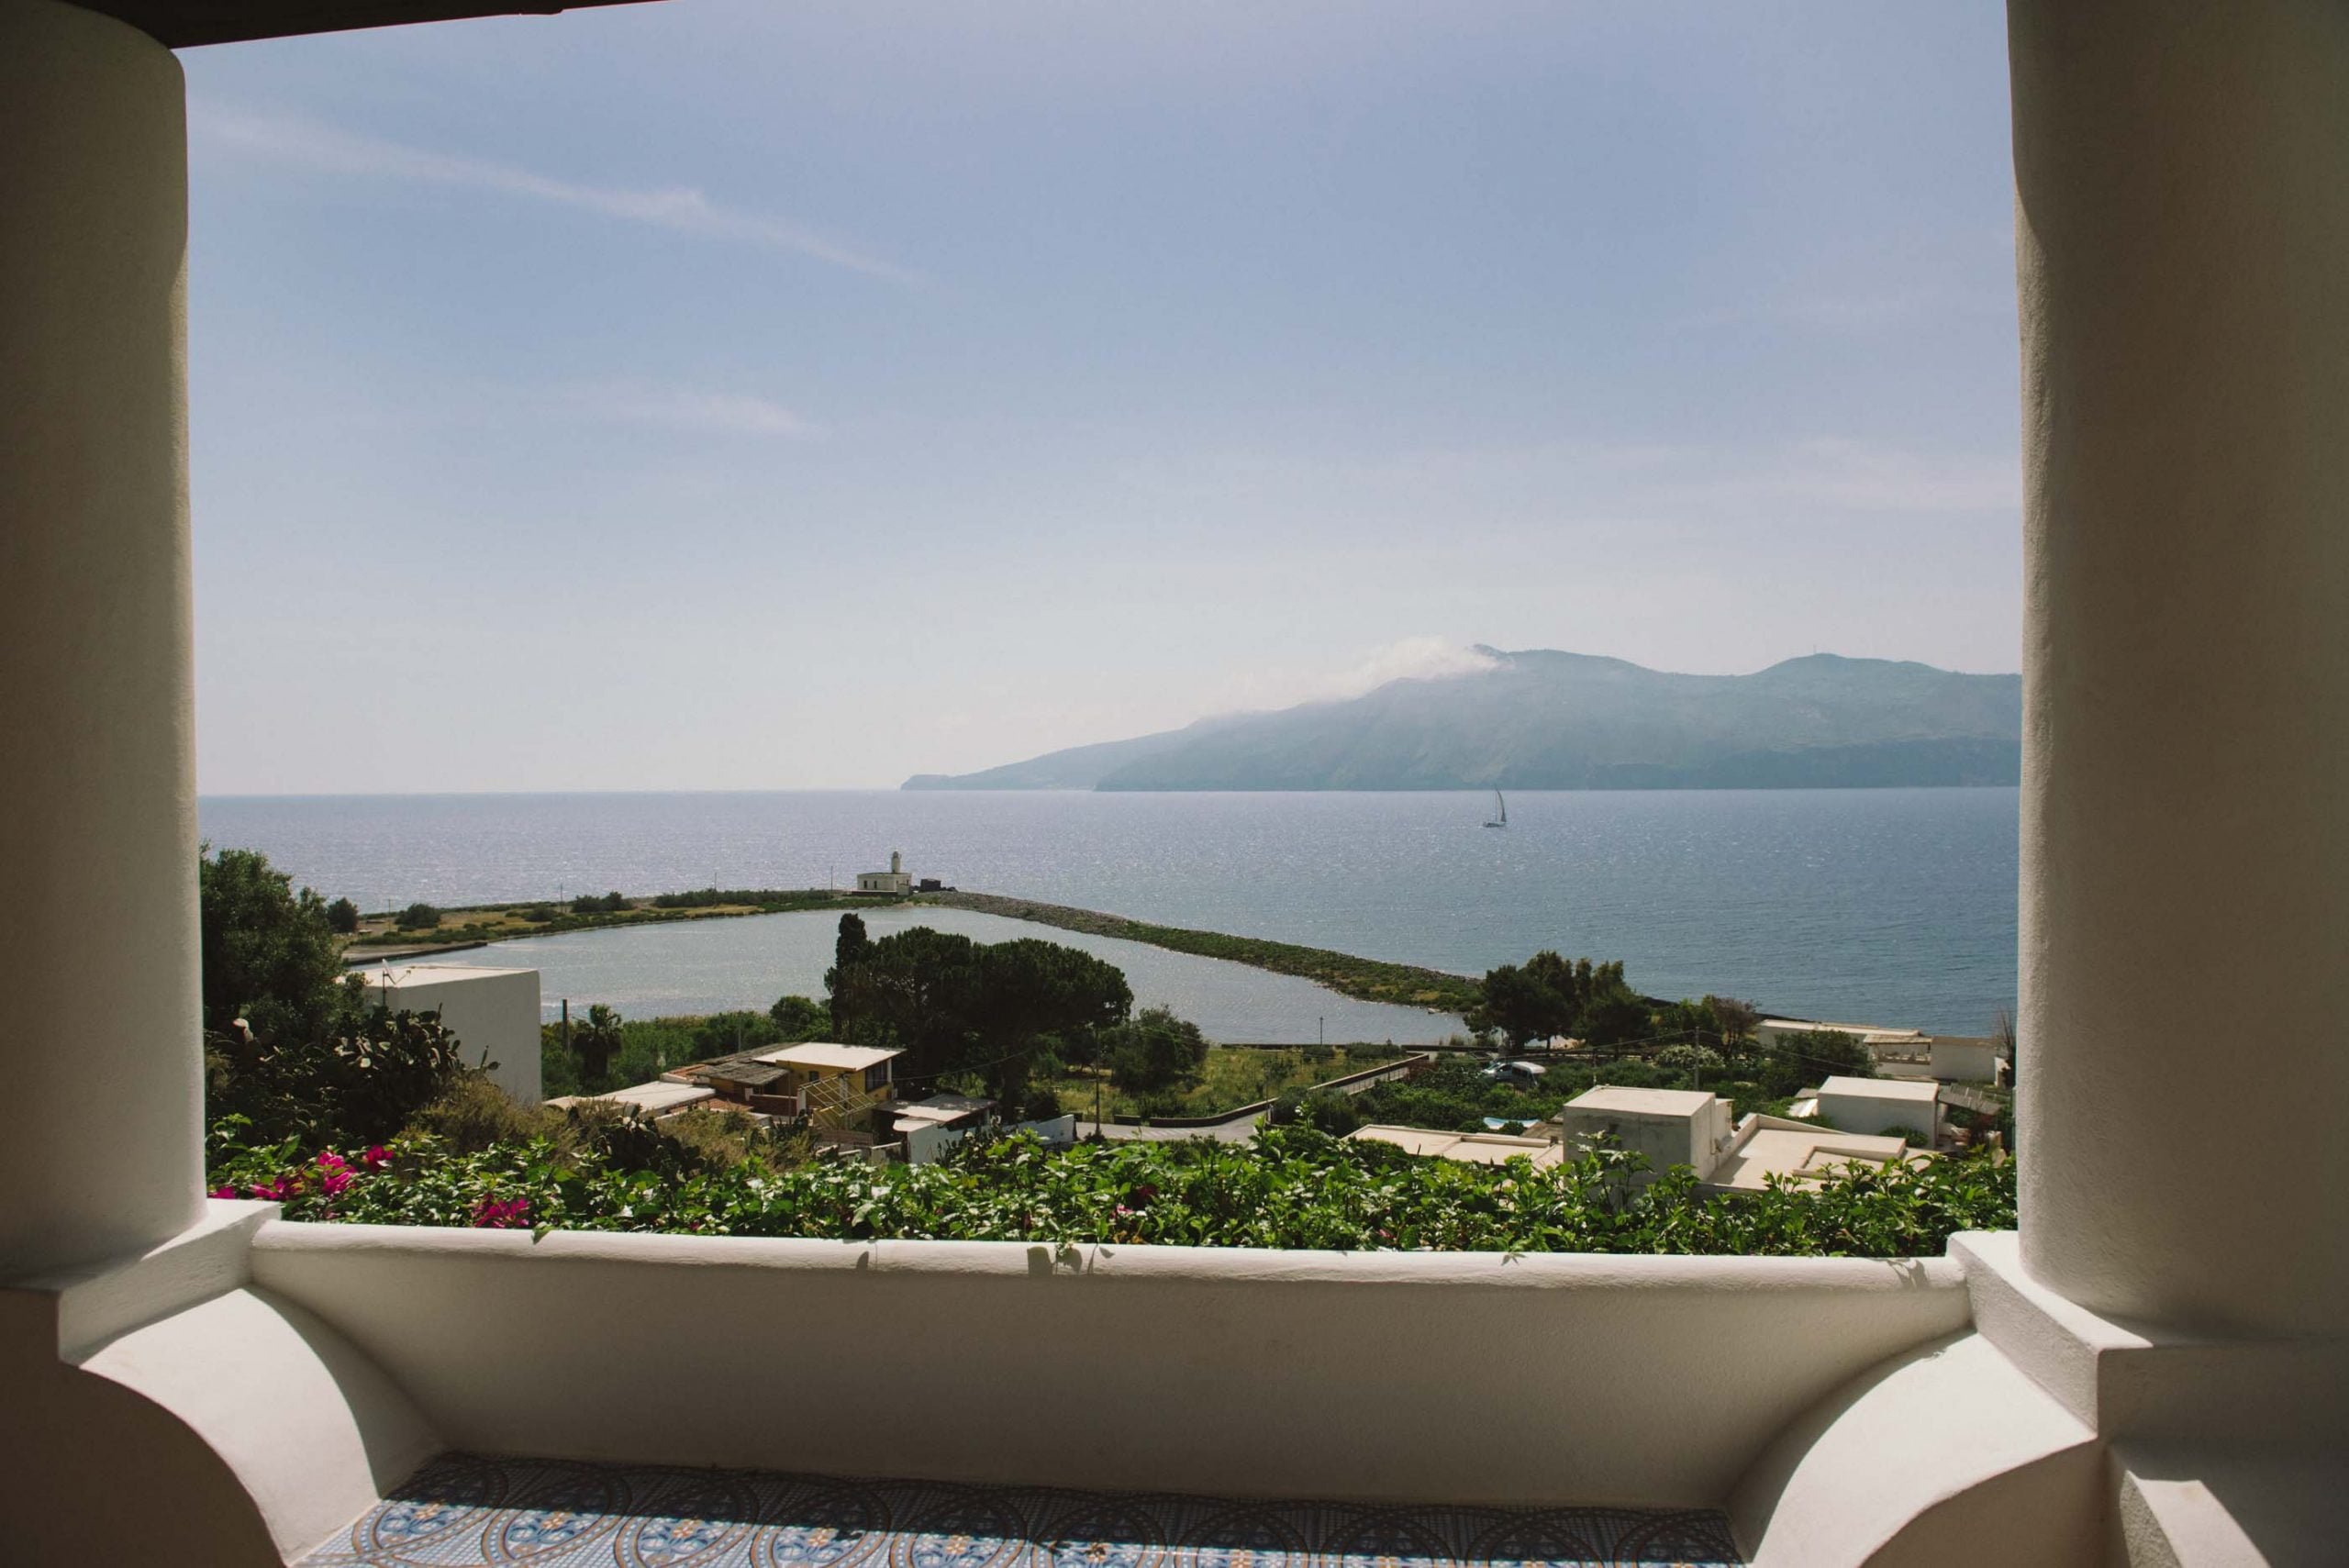 get married in the Aeolian Islands - glam